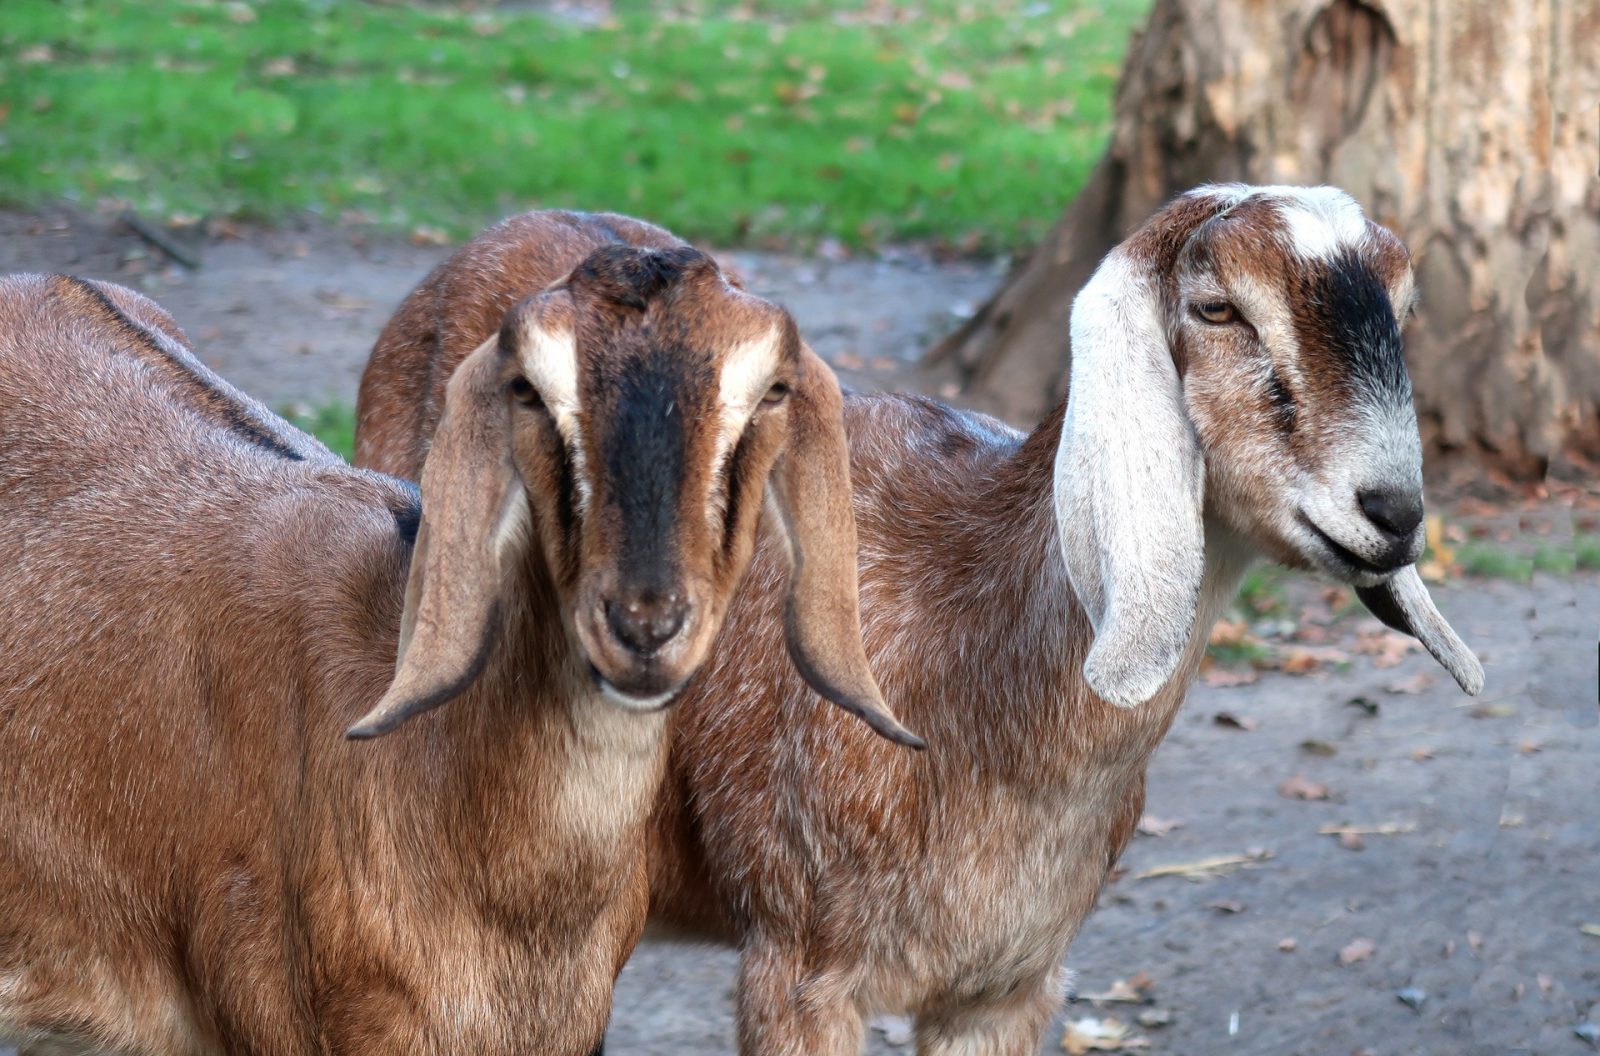 two nubian goats with long ears and roman noses